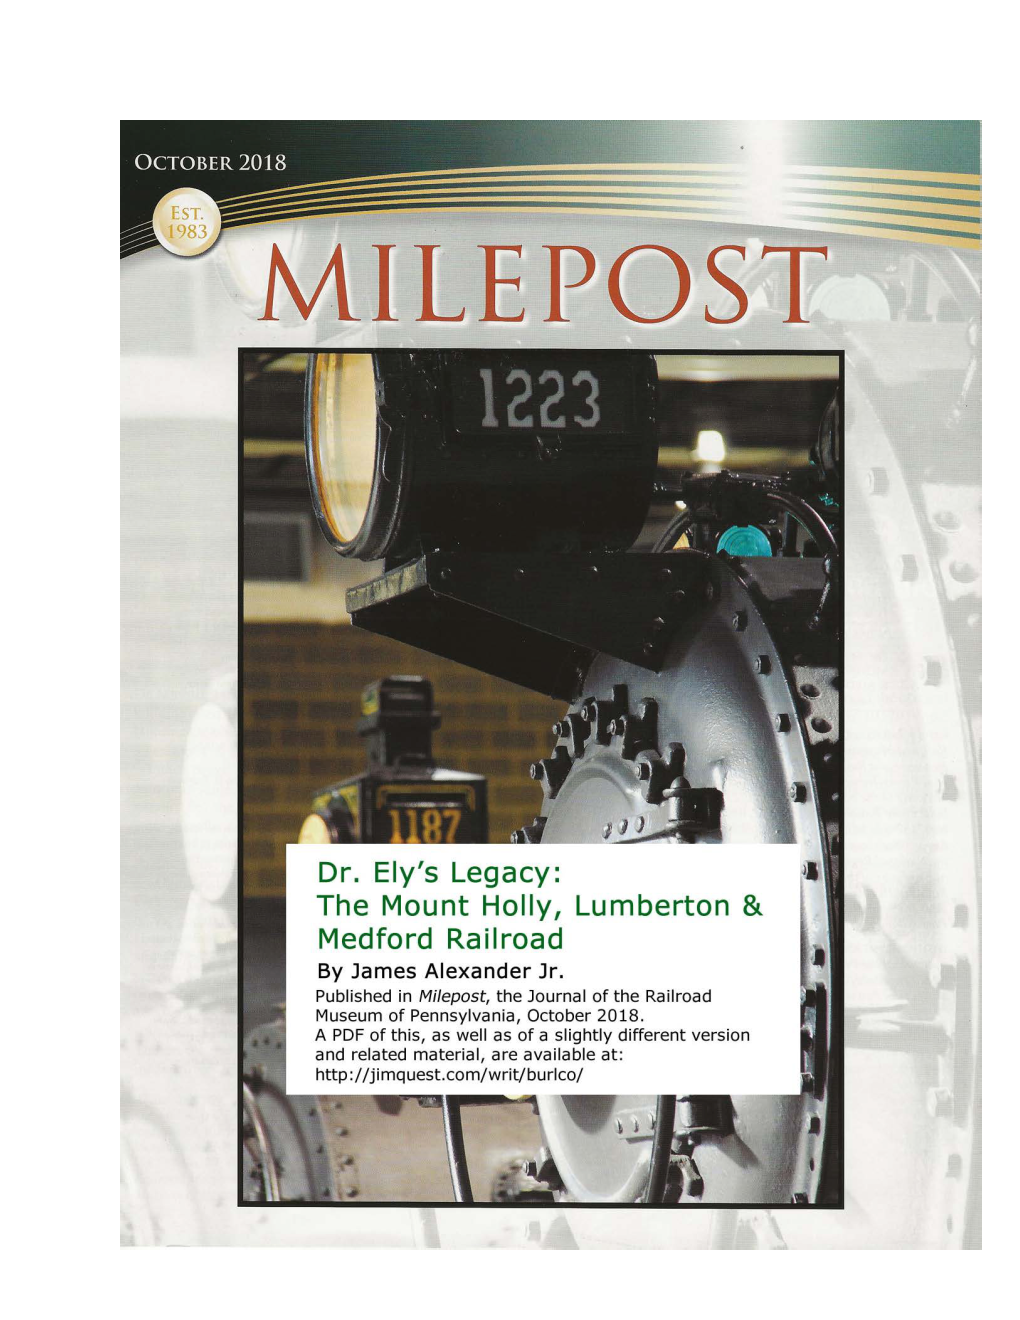 Dr. Ely's Legacy: the Mount Holly, Lumberton & Medford Railroad